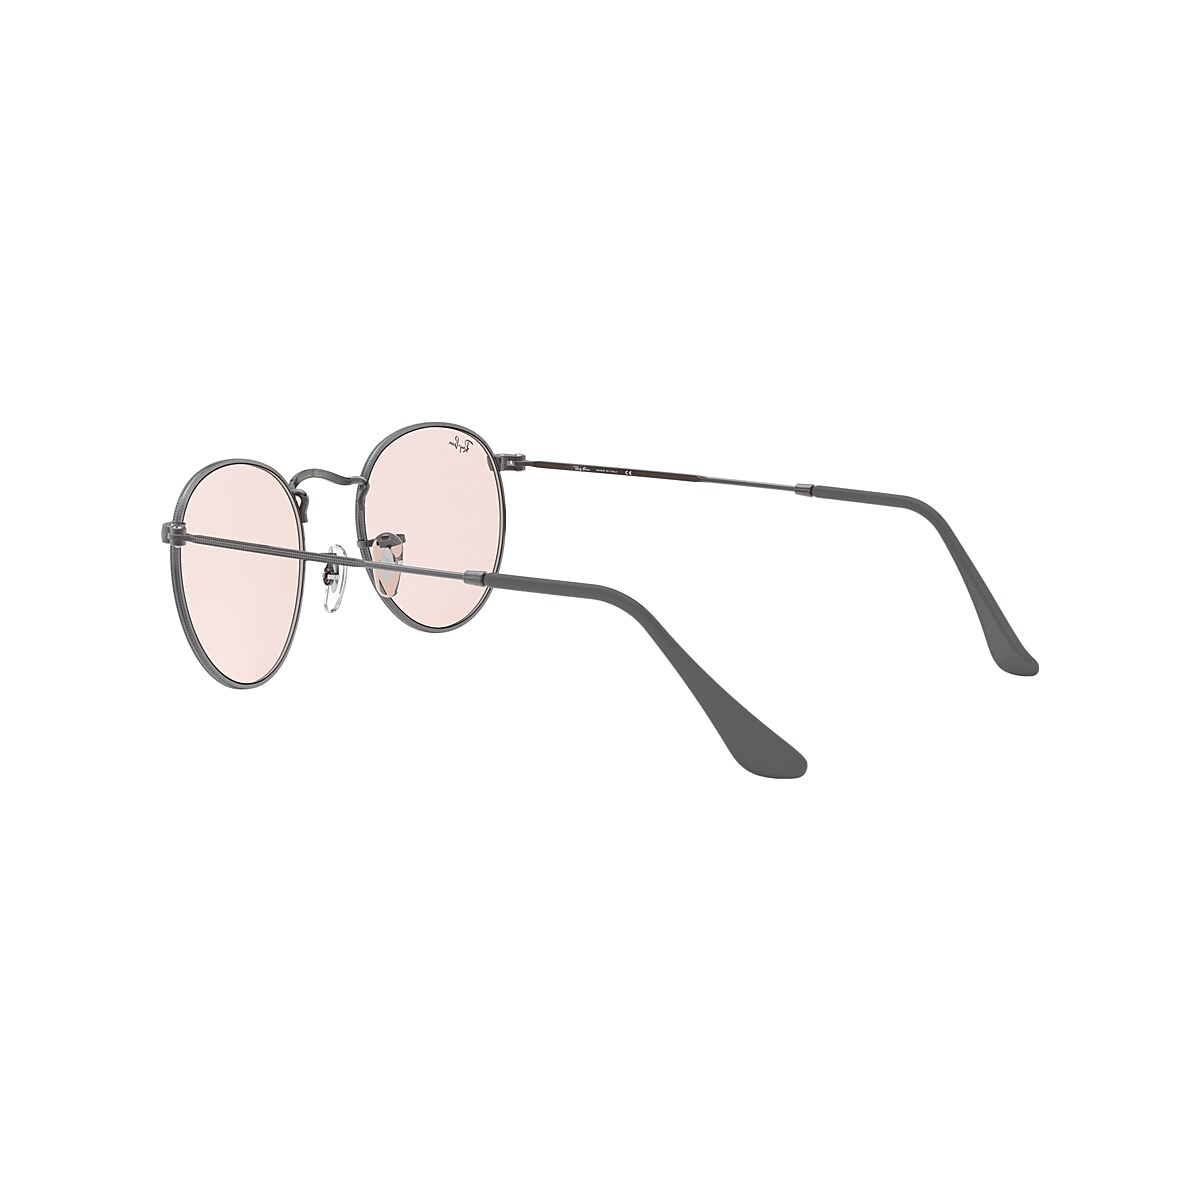 Round Solid Evolve Sunglasses in Gunmetal and Pink Photochromic 